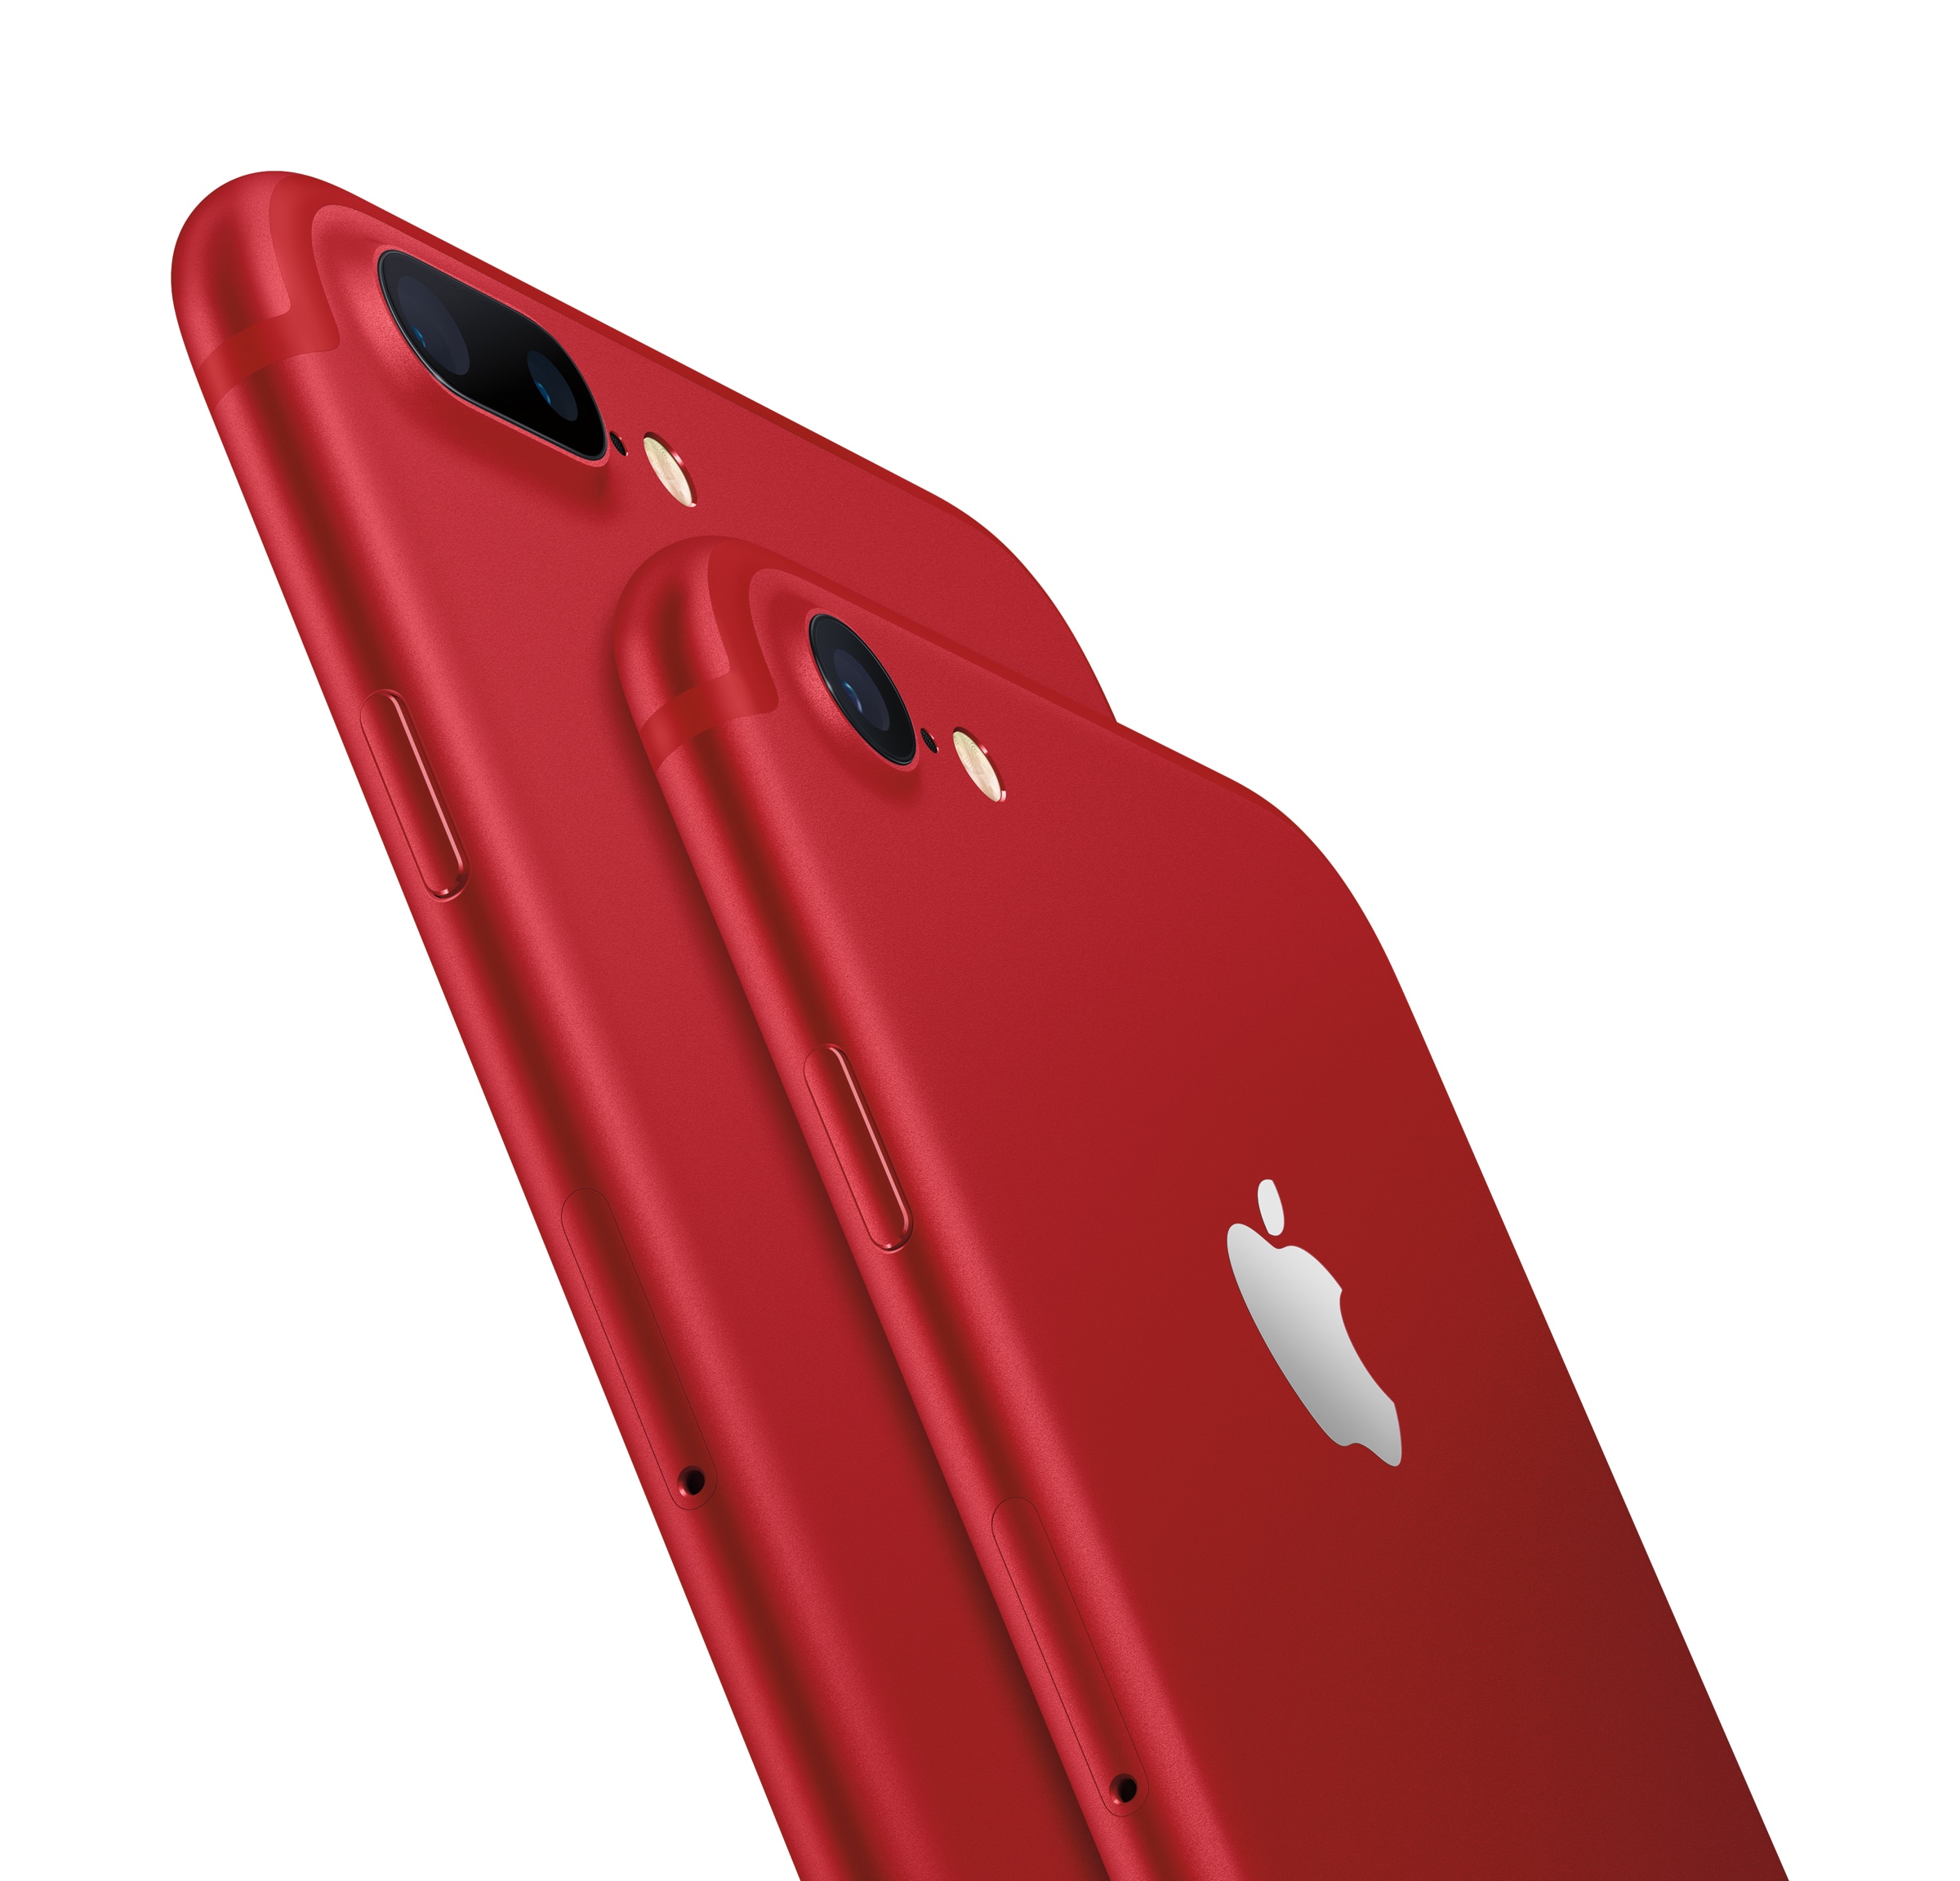 iPhones 7 e 7 Plus (PRODUCT)RED